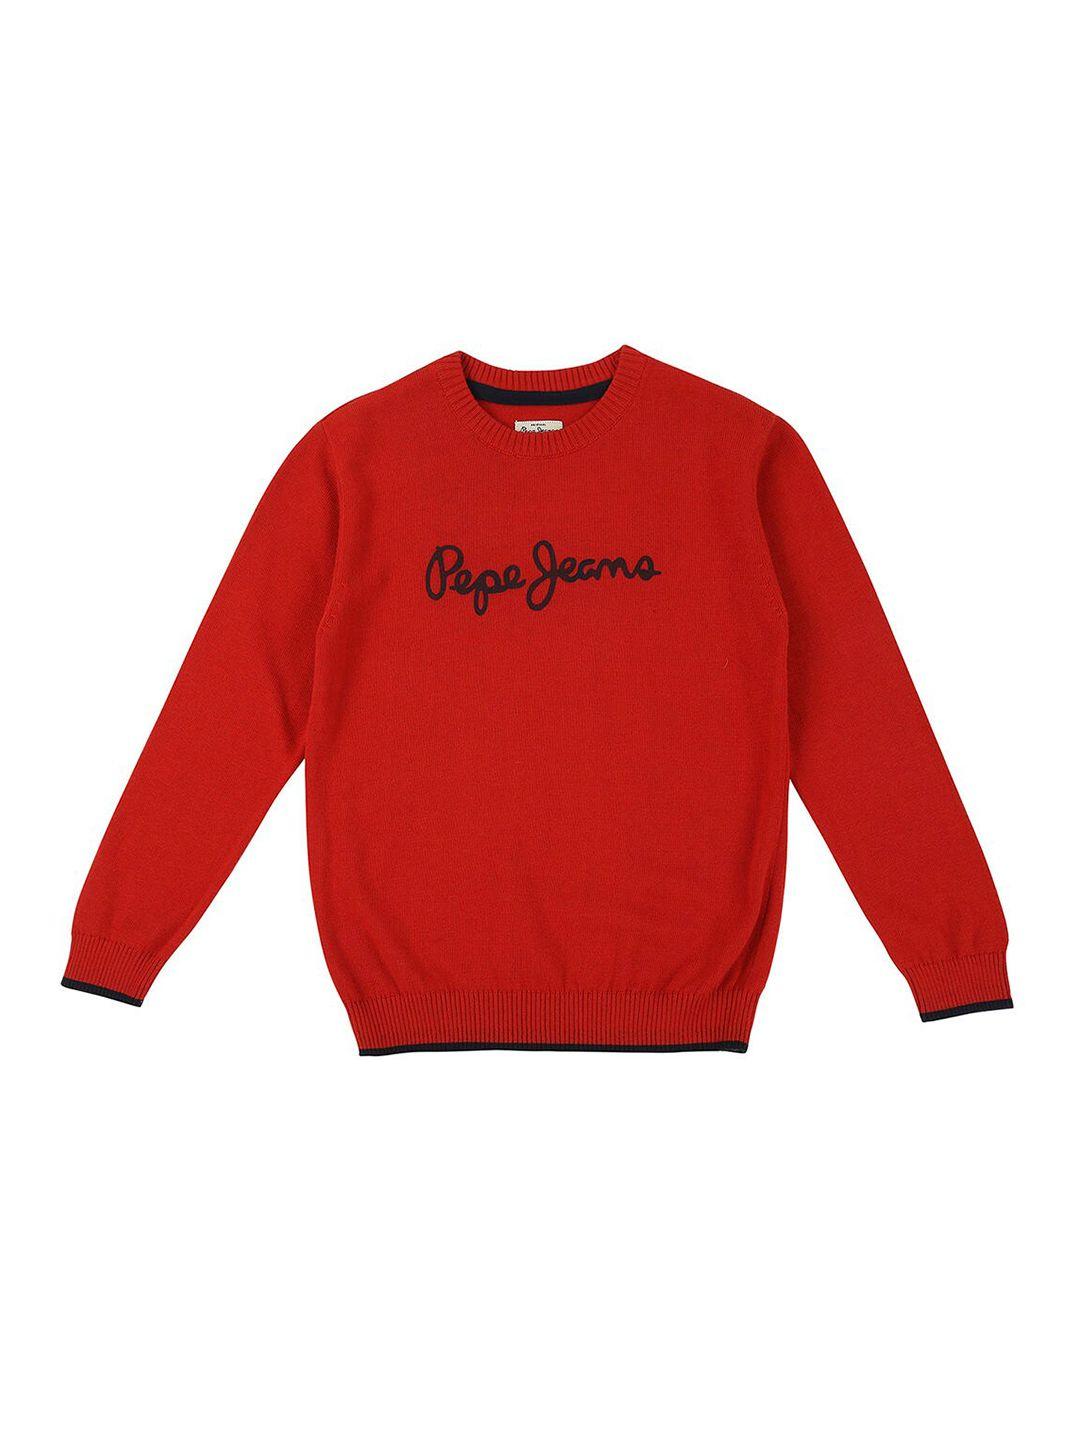 pepe-jeans-boys-red-&-black-typography-printed-cotton-pullover